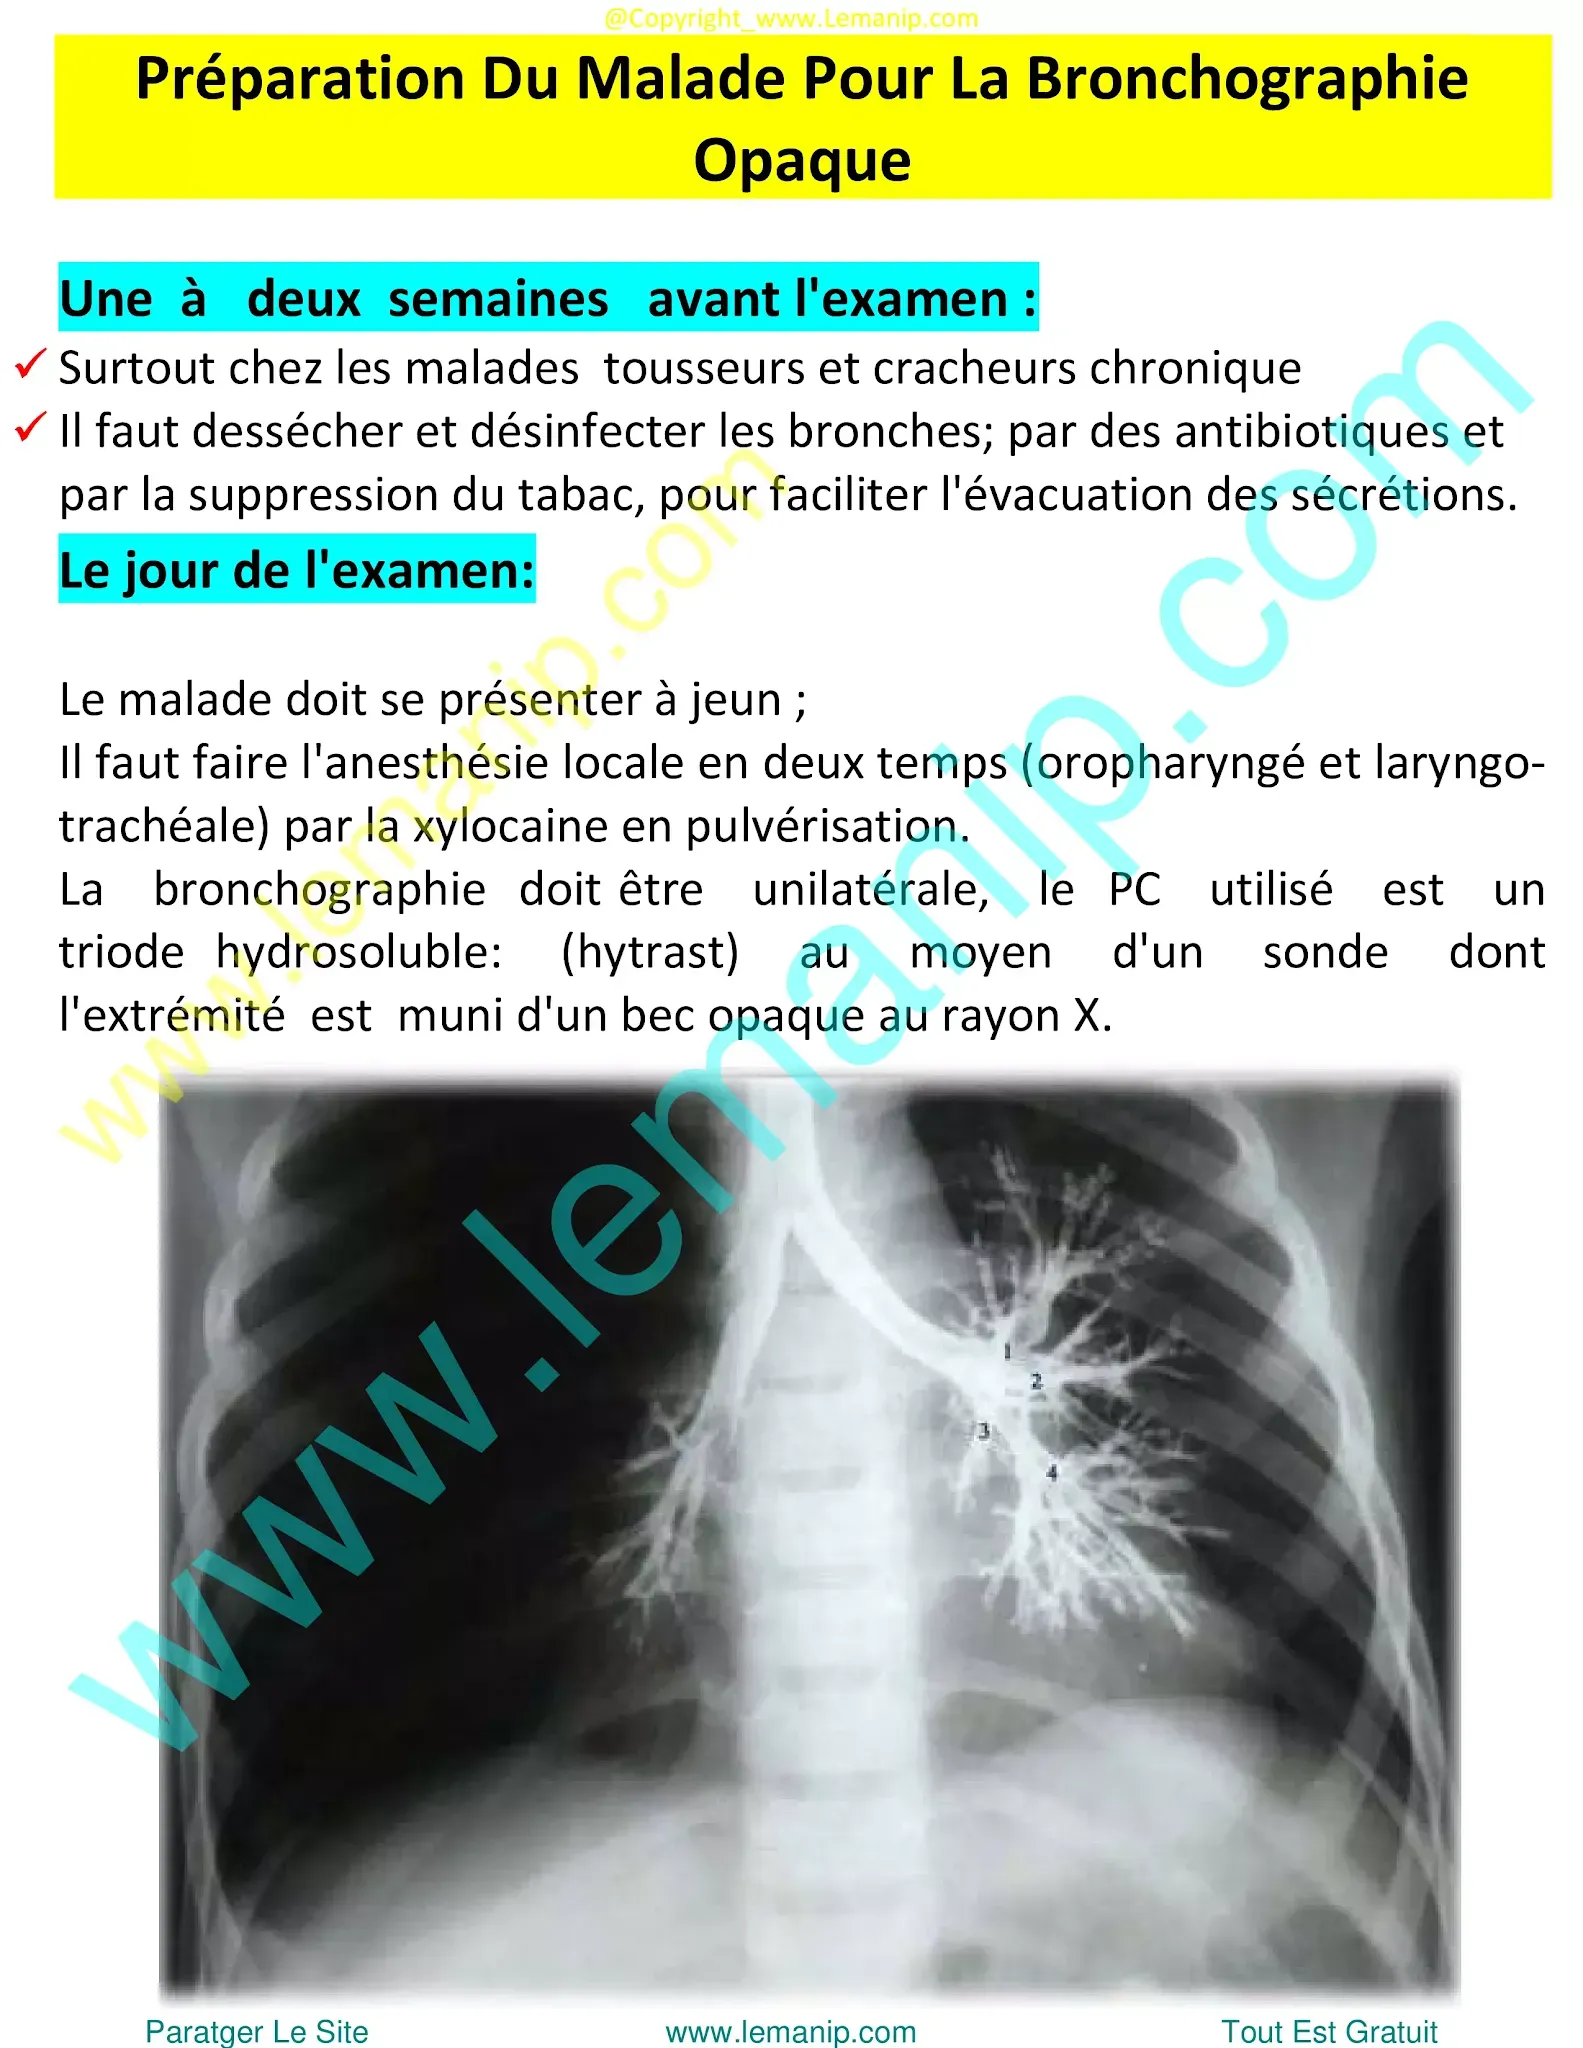 bronchoalveolar ca,lung lavage for copd,whole lung lavage,lung lavage,opdivo lung,restrictive airway disease,small airway disease,inflated lungs,hyperexpanded lungs,enlarged lungs